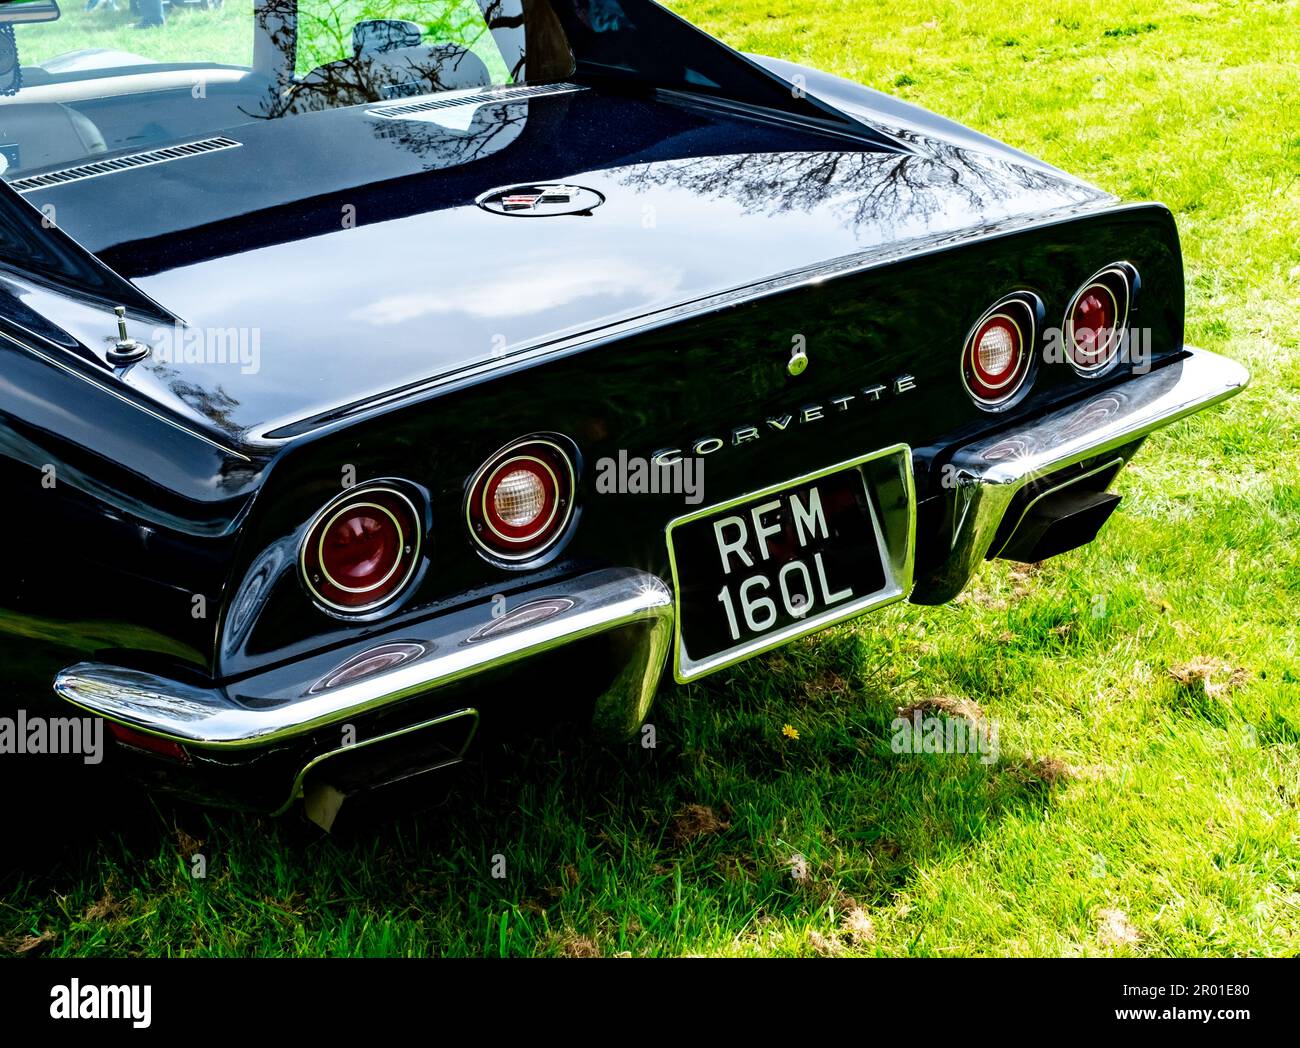 Earsham, Norfolk, UK – April 30 2023. The rear end and back of a classic American Corvette muscle car on display at a small and local outdoor car show Stock Photo